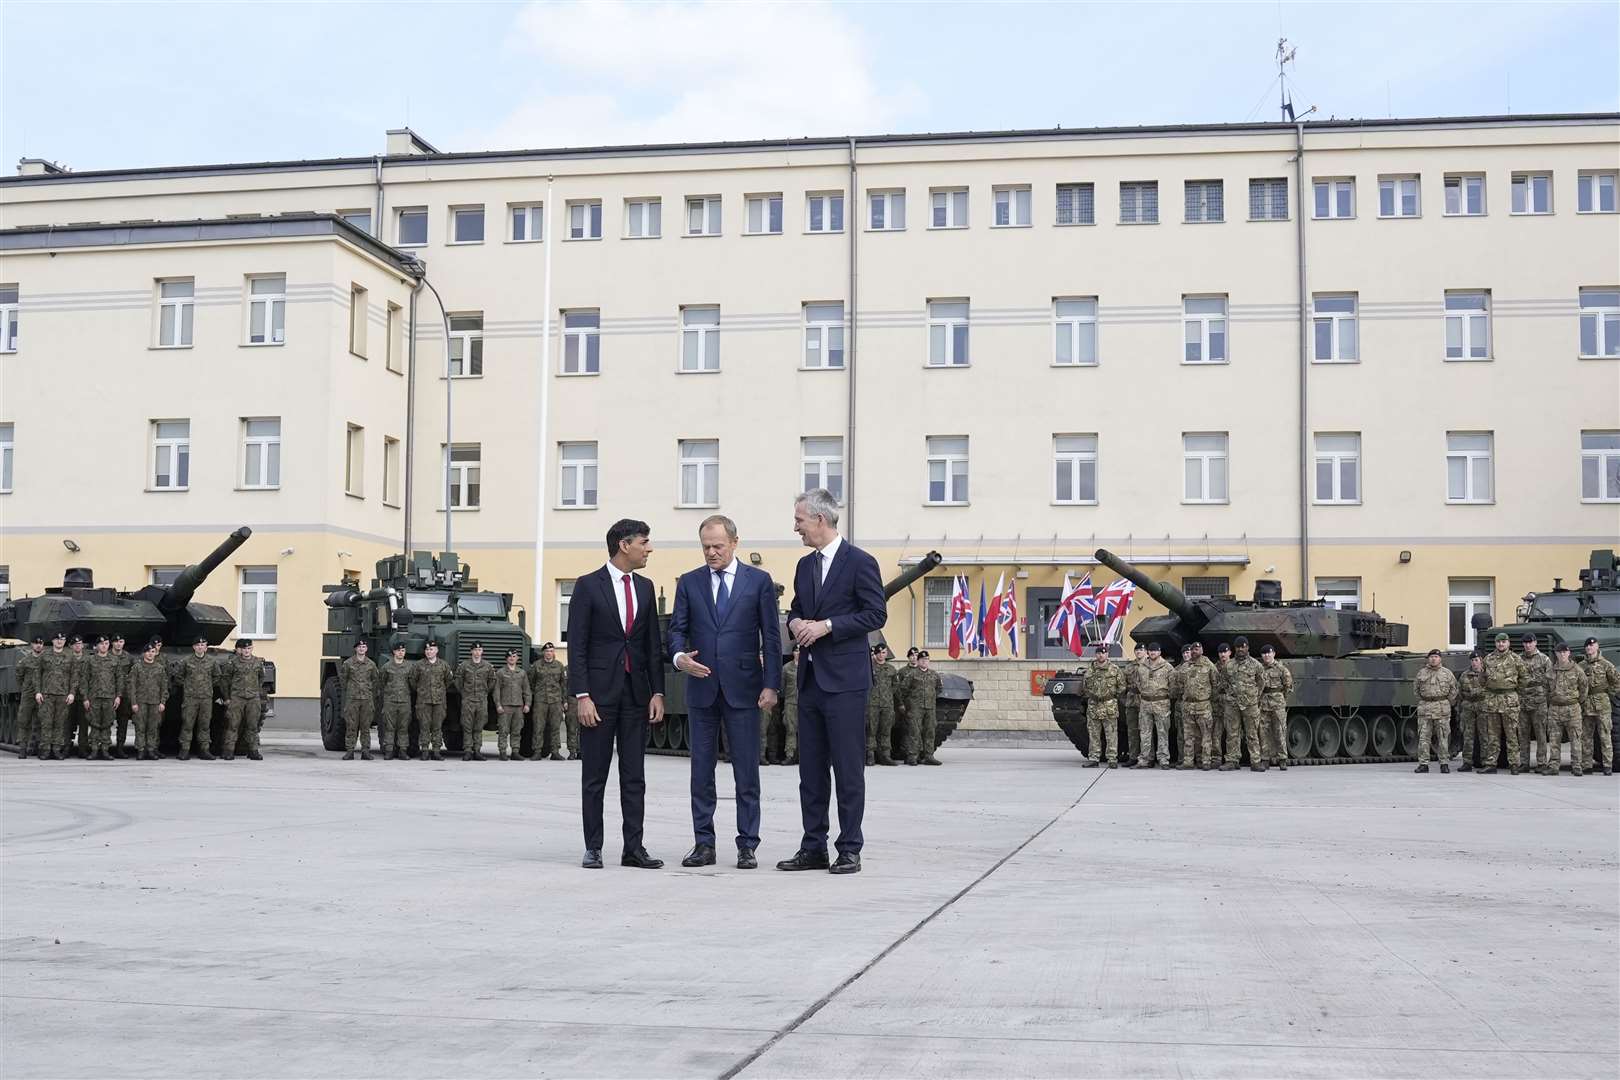 Prime Minister Rishi Sunak, Poland’s Donald Tusk and Nato’s Jens Stoltenberg at the Armoured Brigade barracks in Warsaw (Alistair Grant/PA)